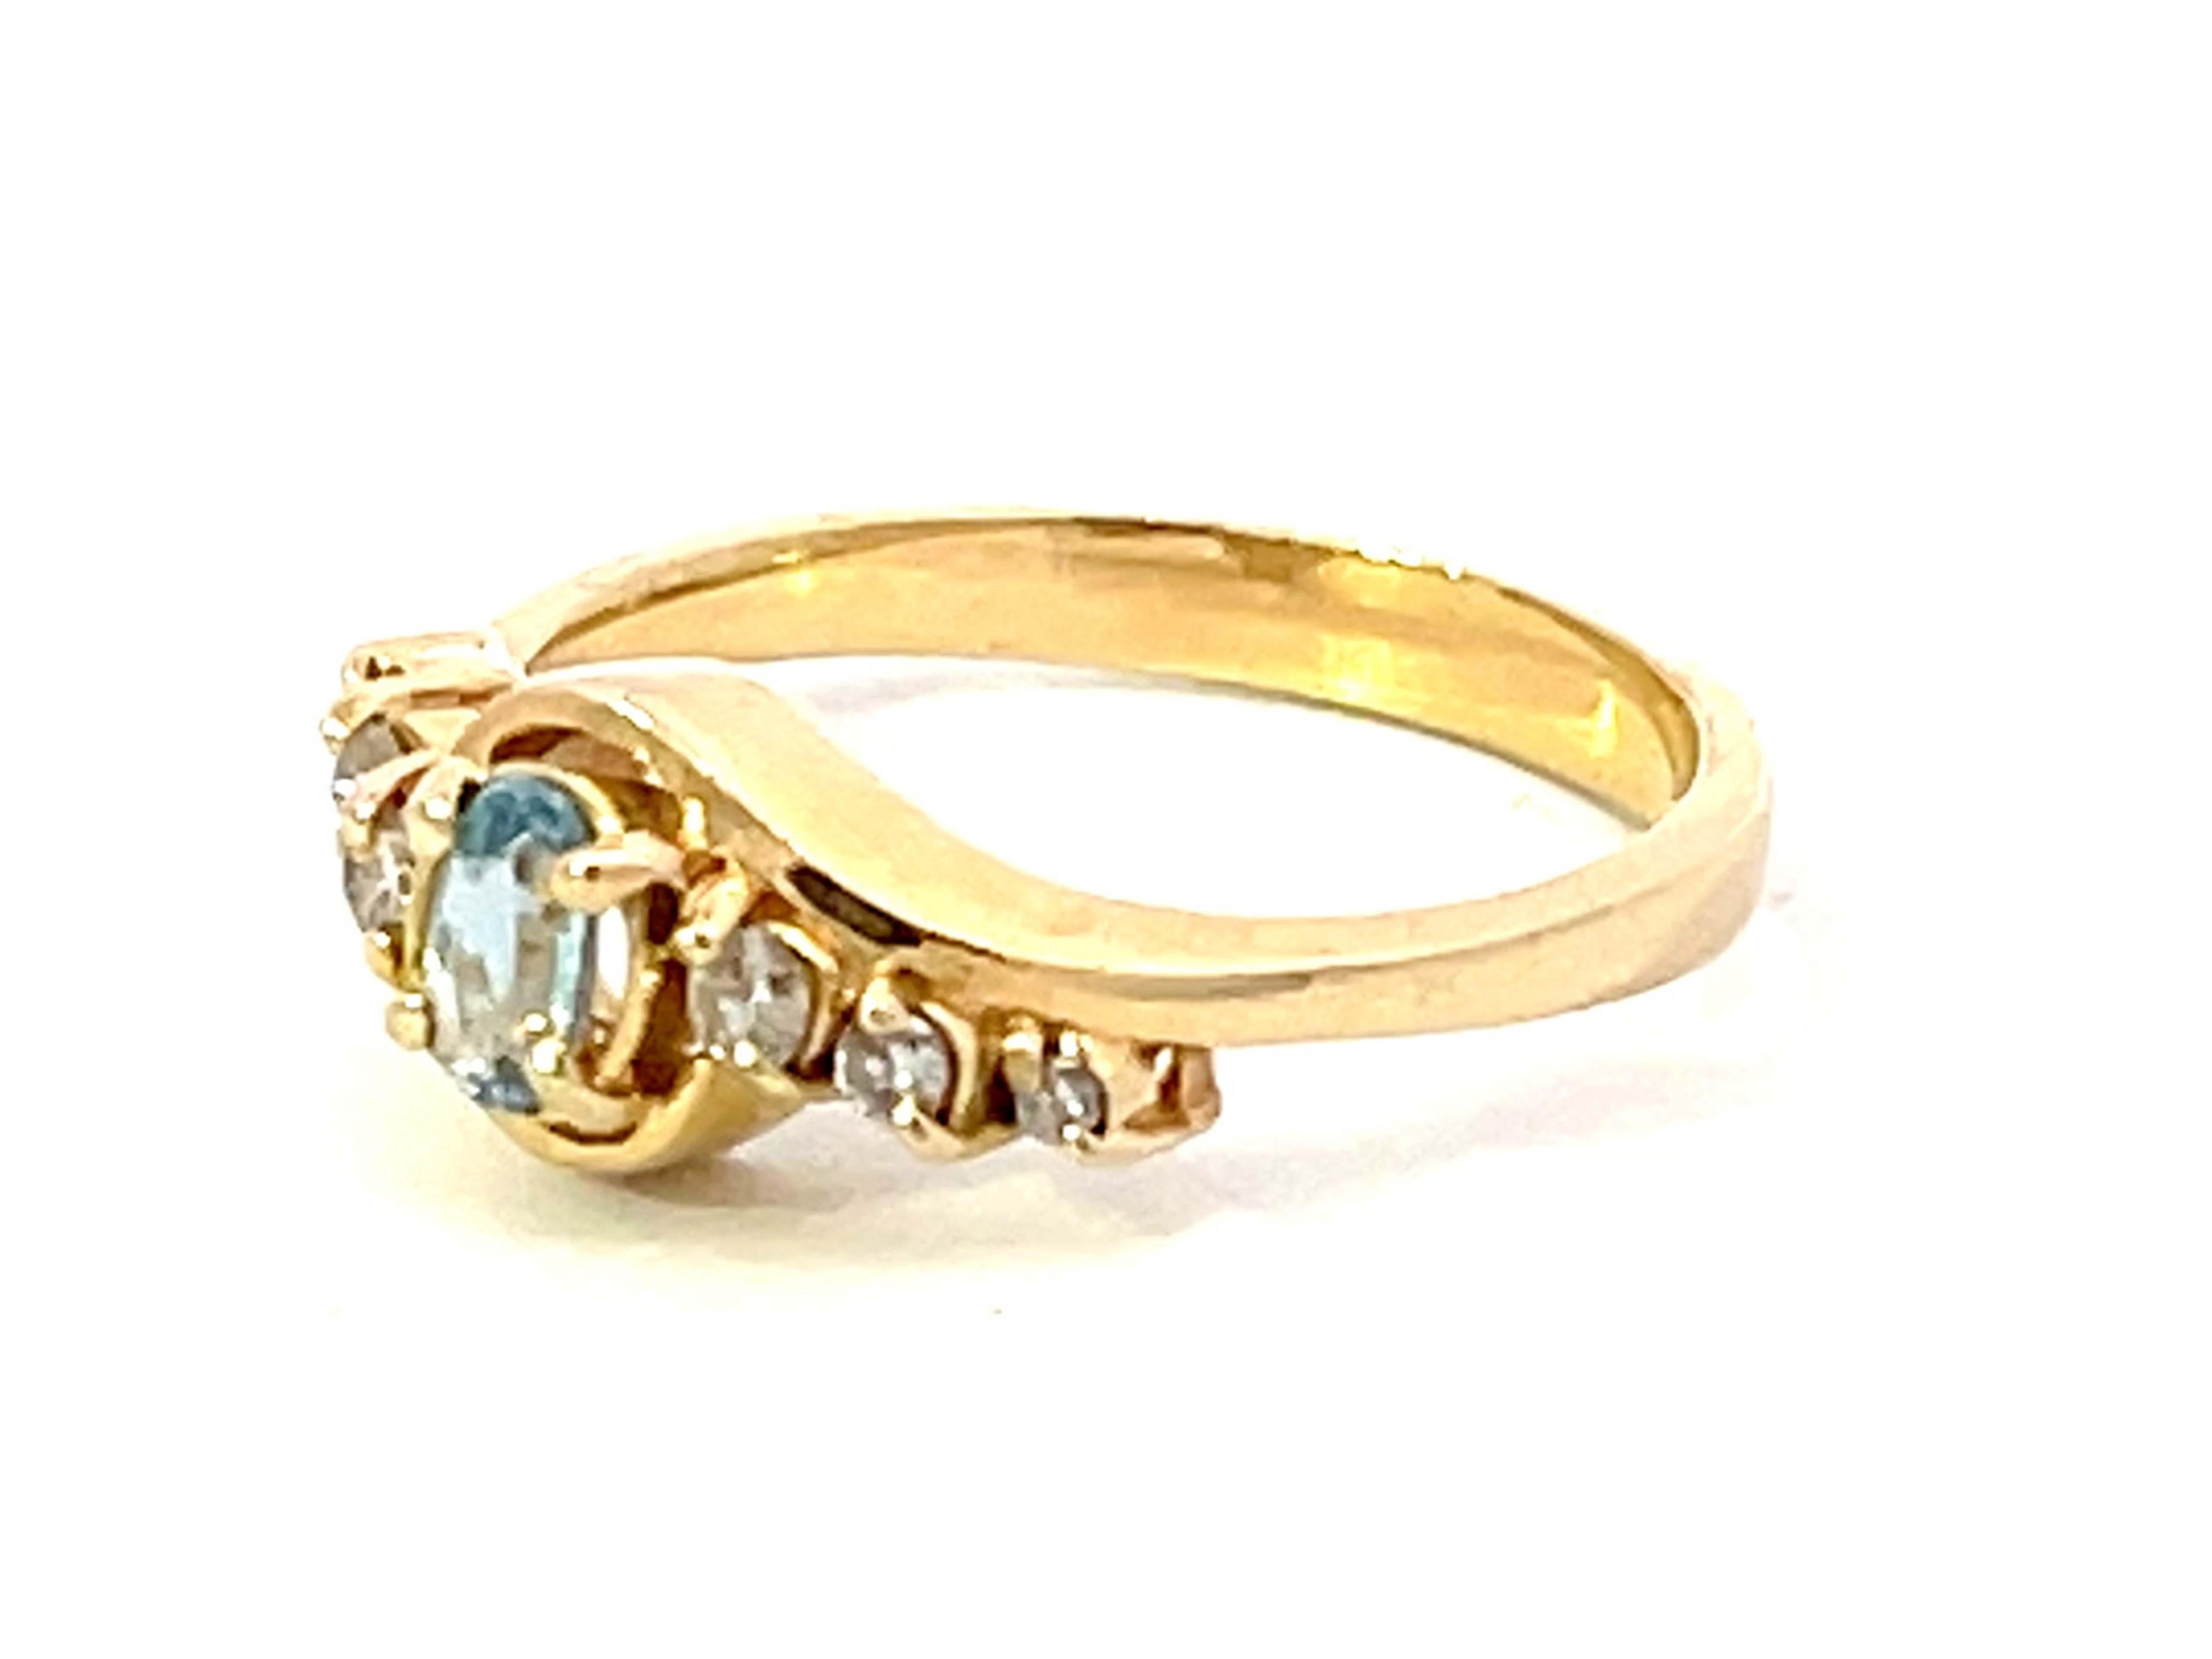 Oval Aquamarine and Diamond Ring in 14k Yellow Gold In Excellent Condition For Sale In Honolulu, HI